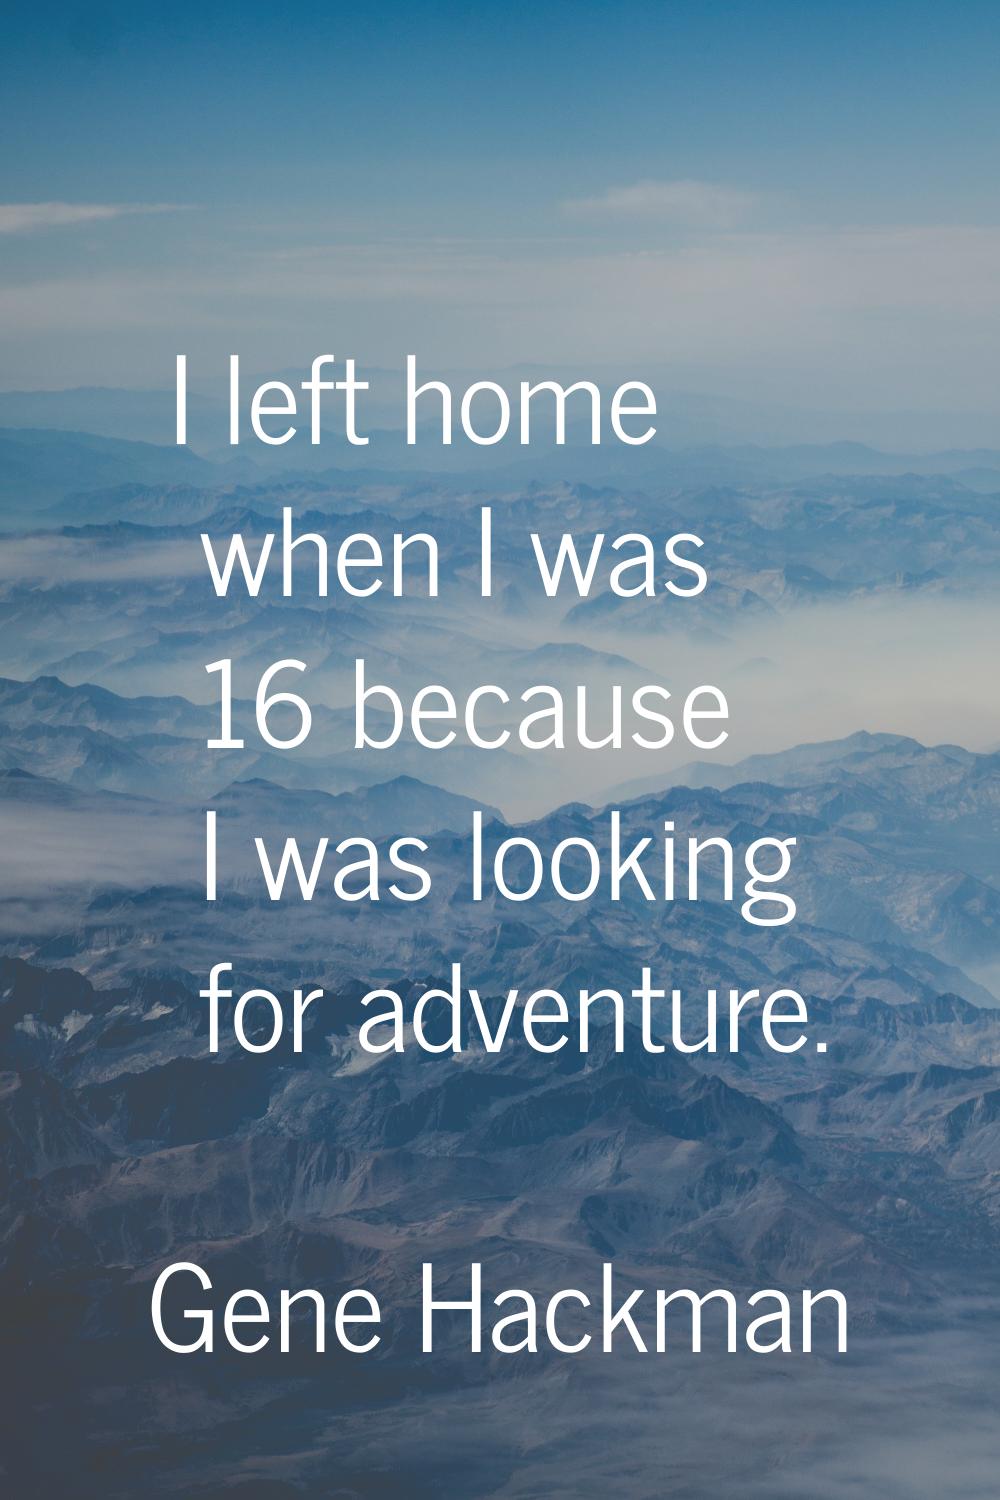 I left home when I was 16 because I was looking for adventure.